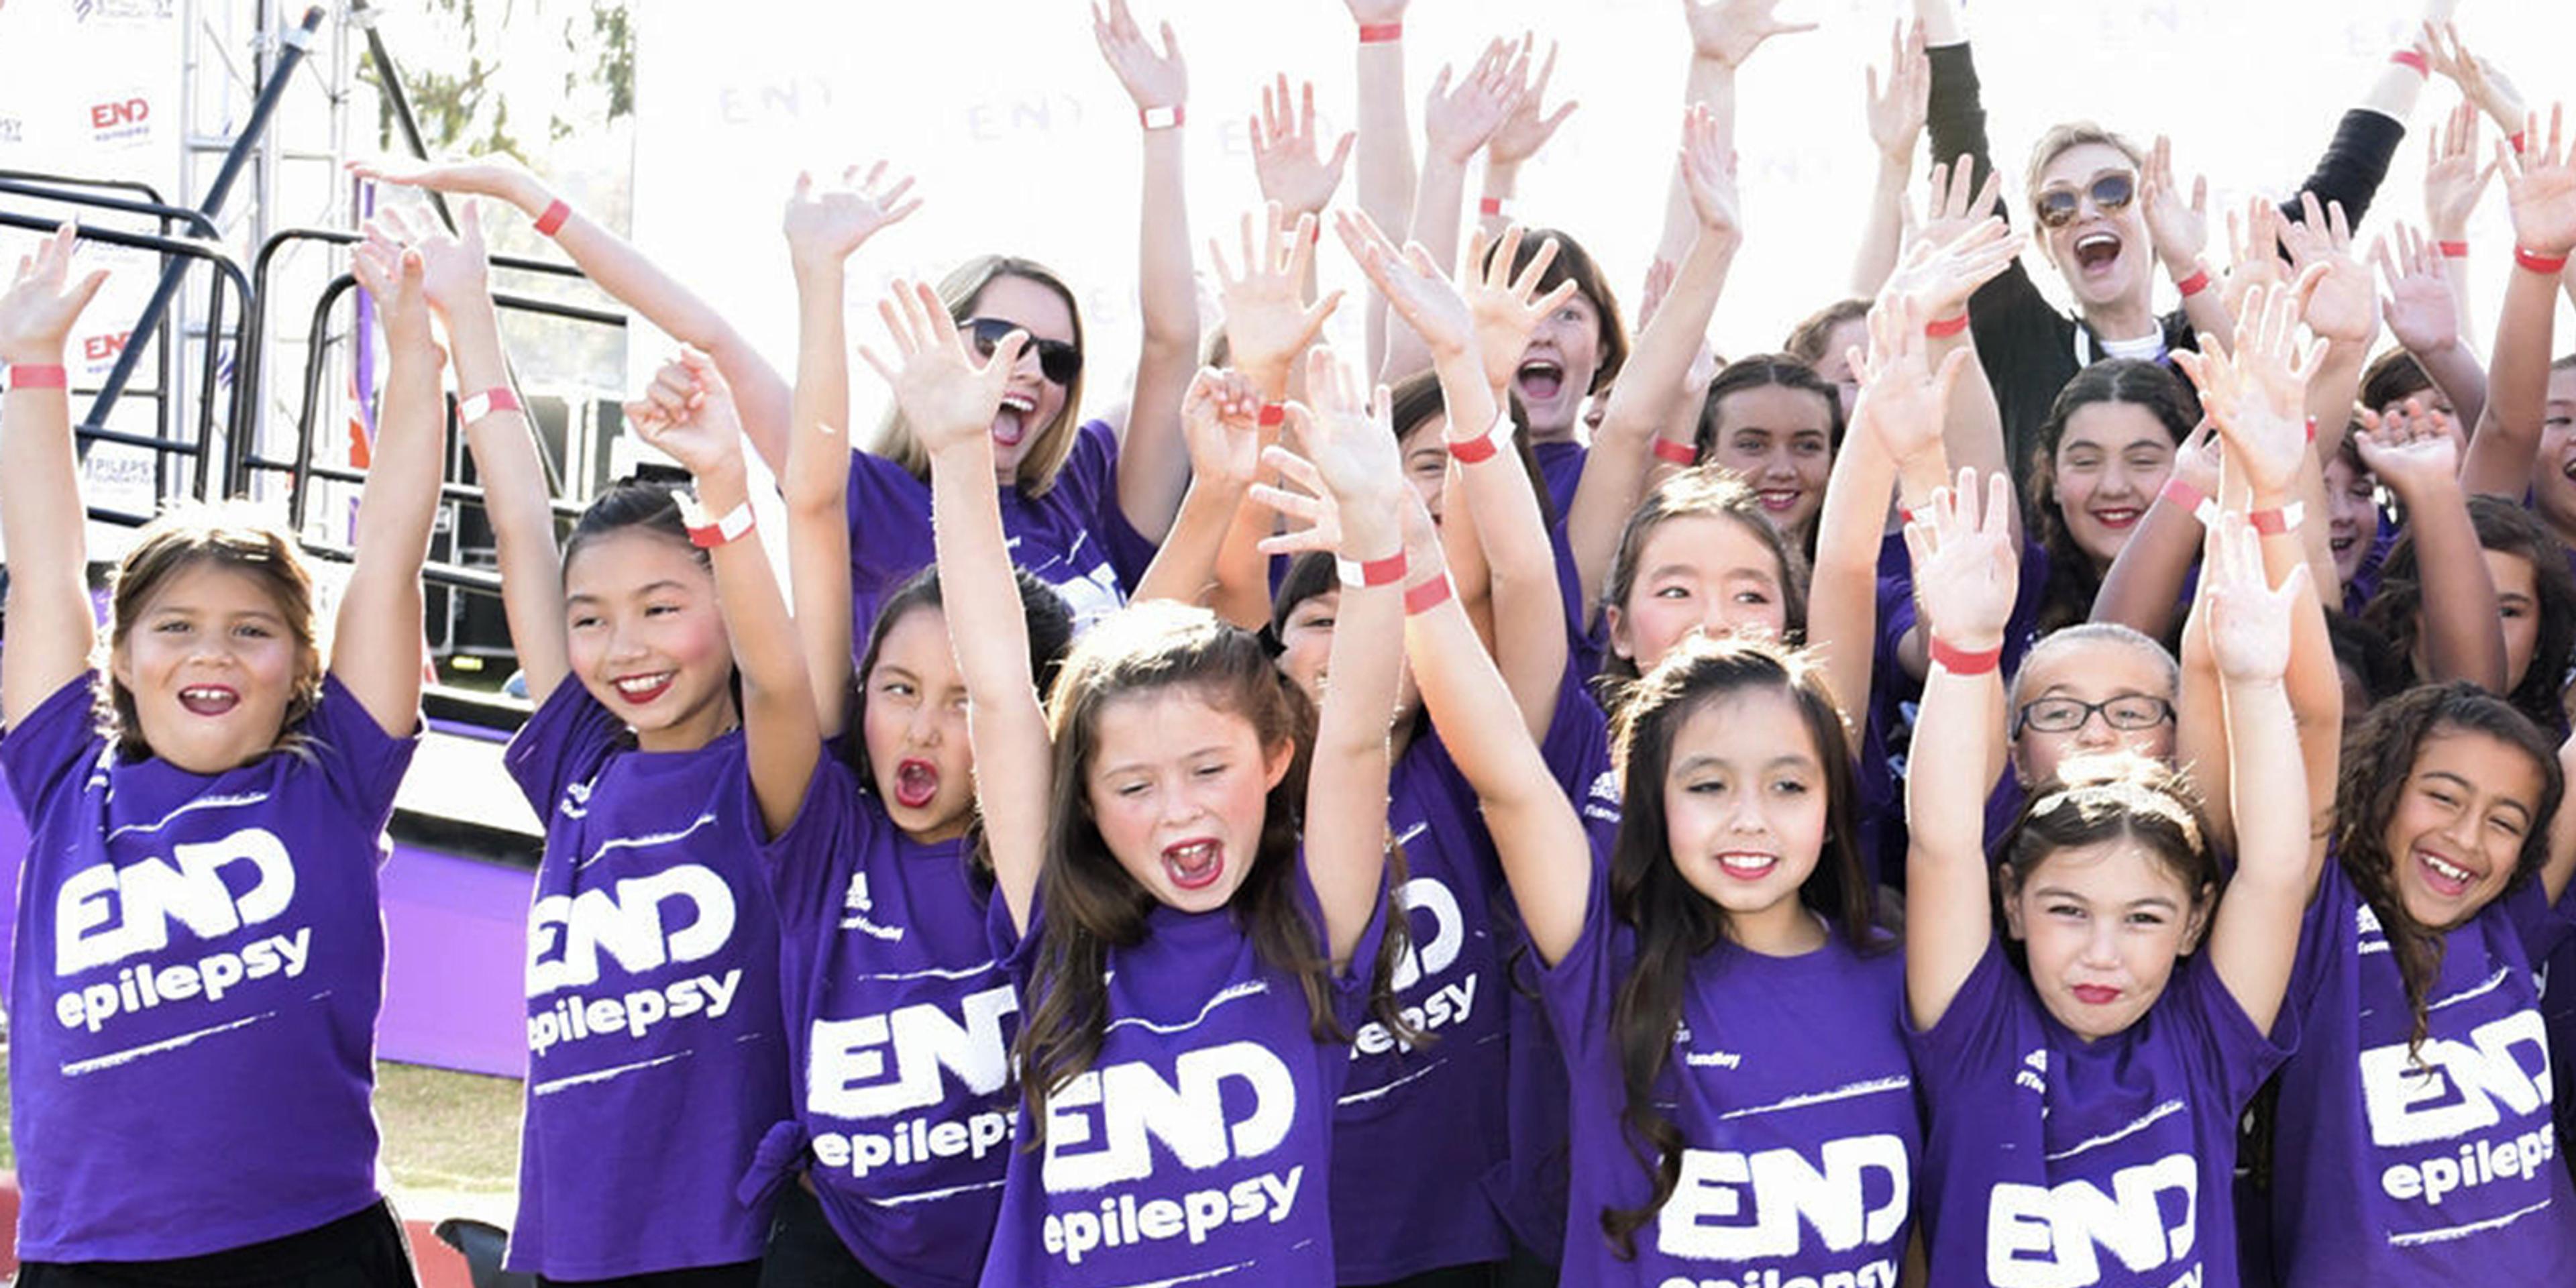 join-us-at-the-walk-to-end-epilepsy-in-d-c-cover-image